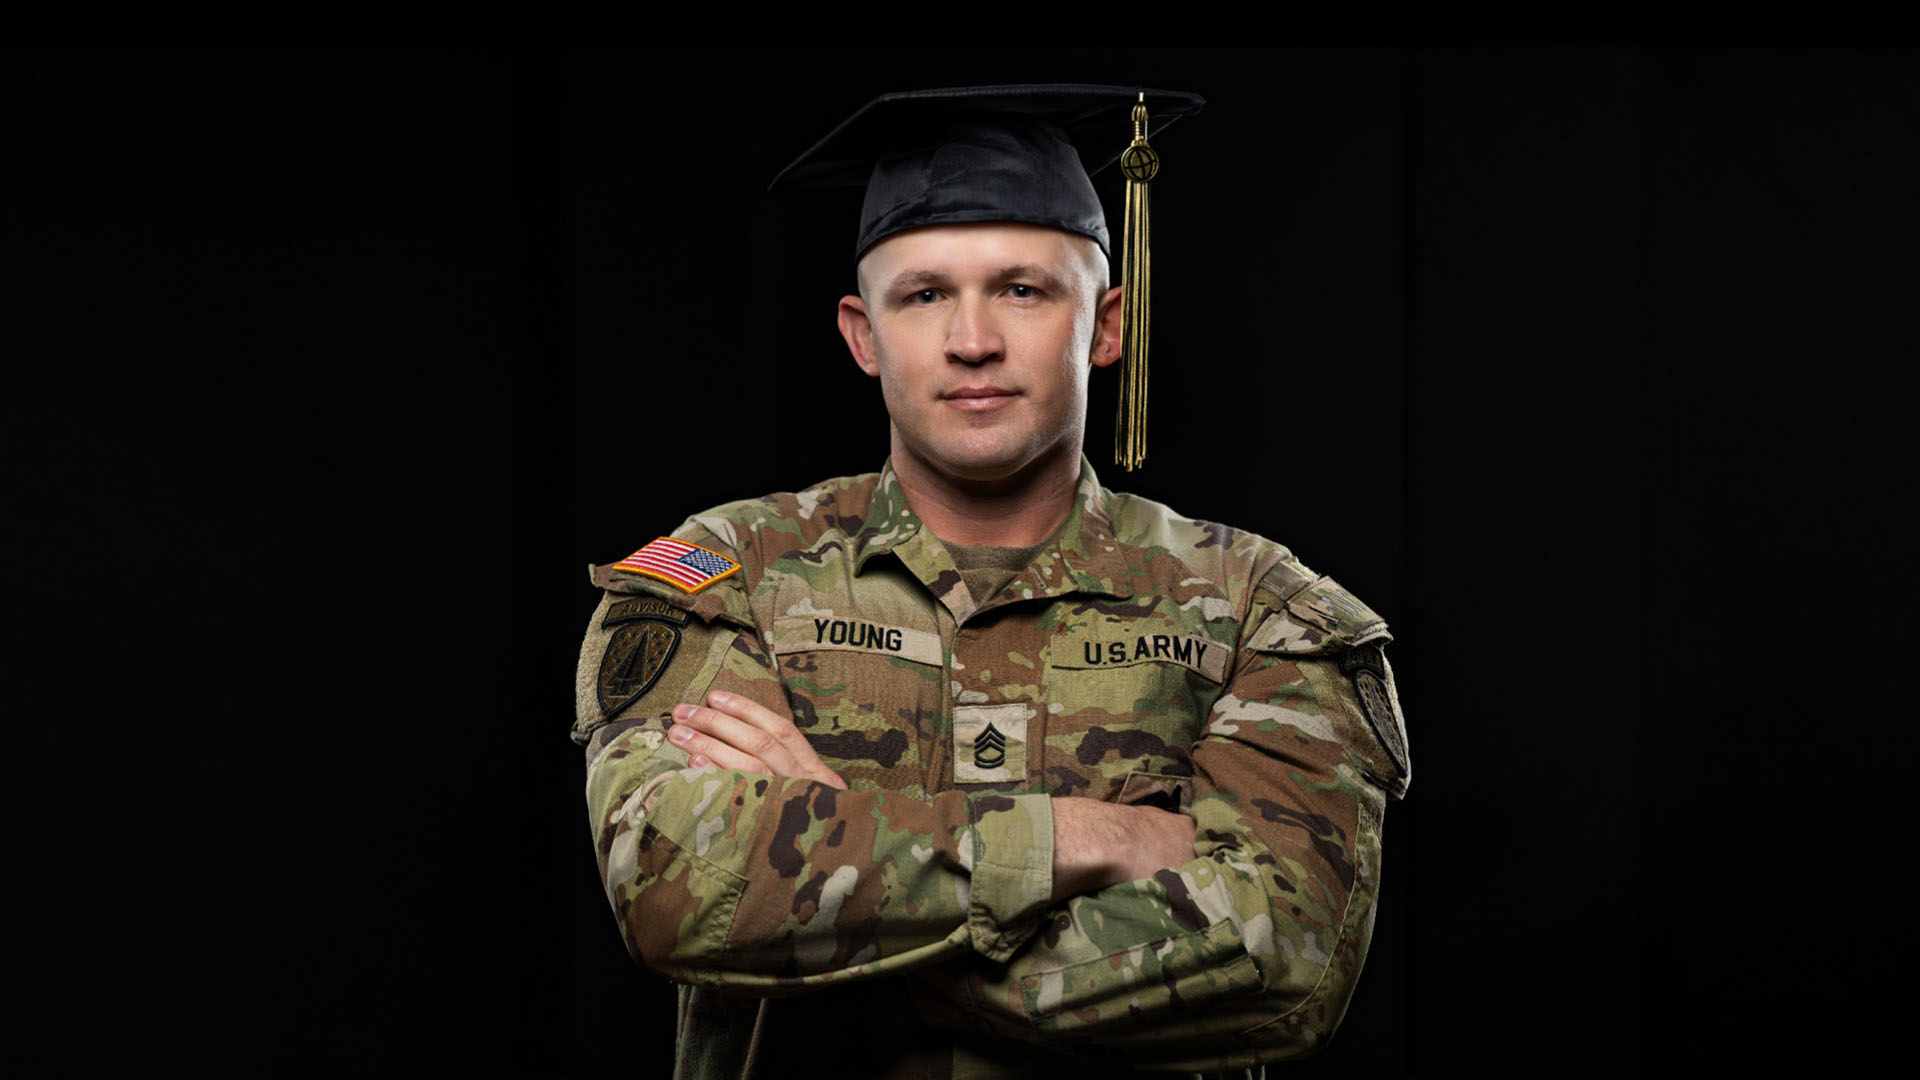 Dustin Young wearing graduation cap and military uniform